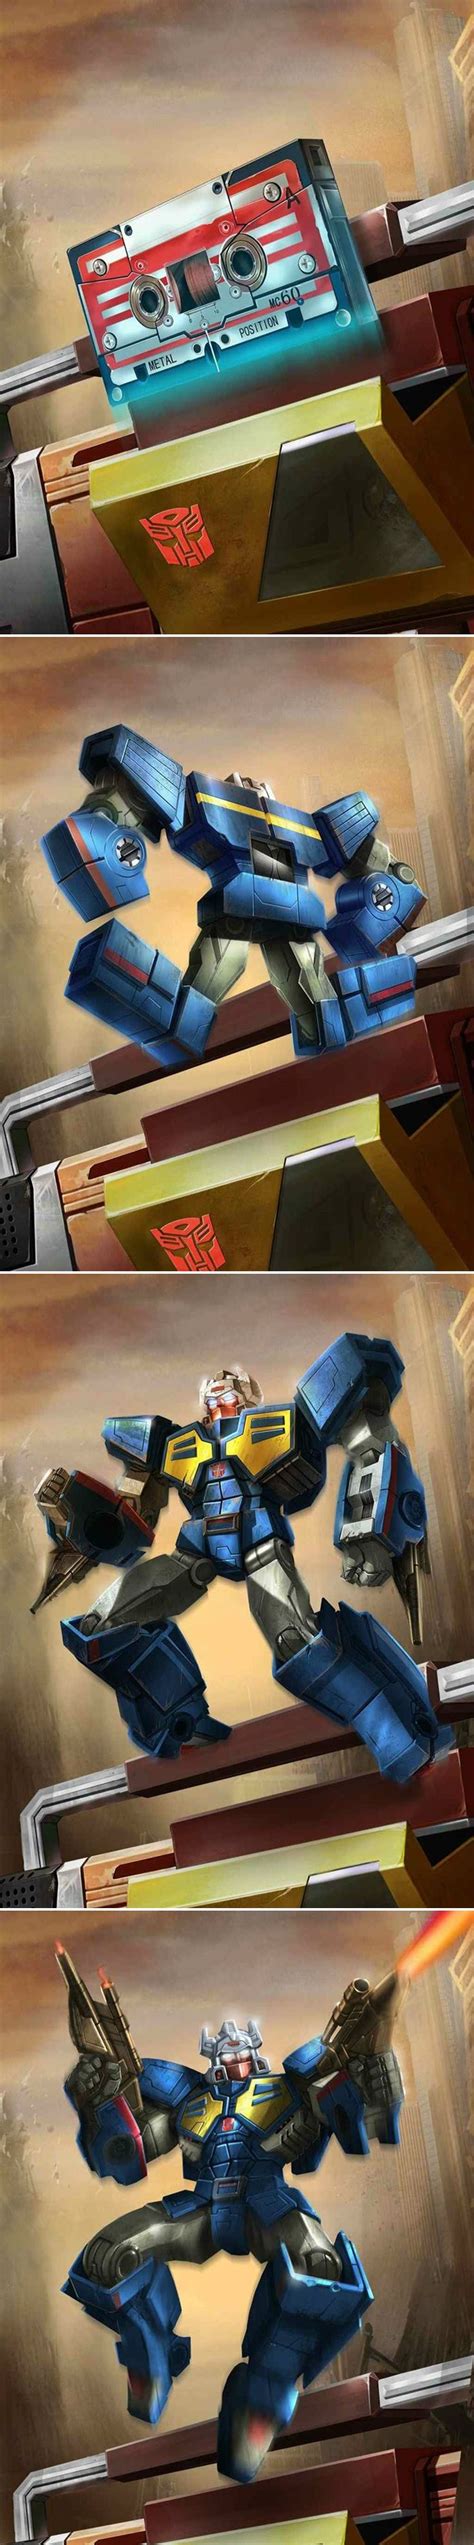 604 best transformers images on pinterest comics comic book and comic books